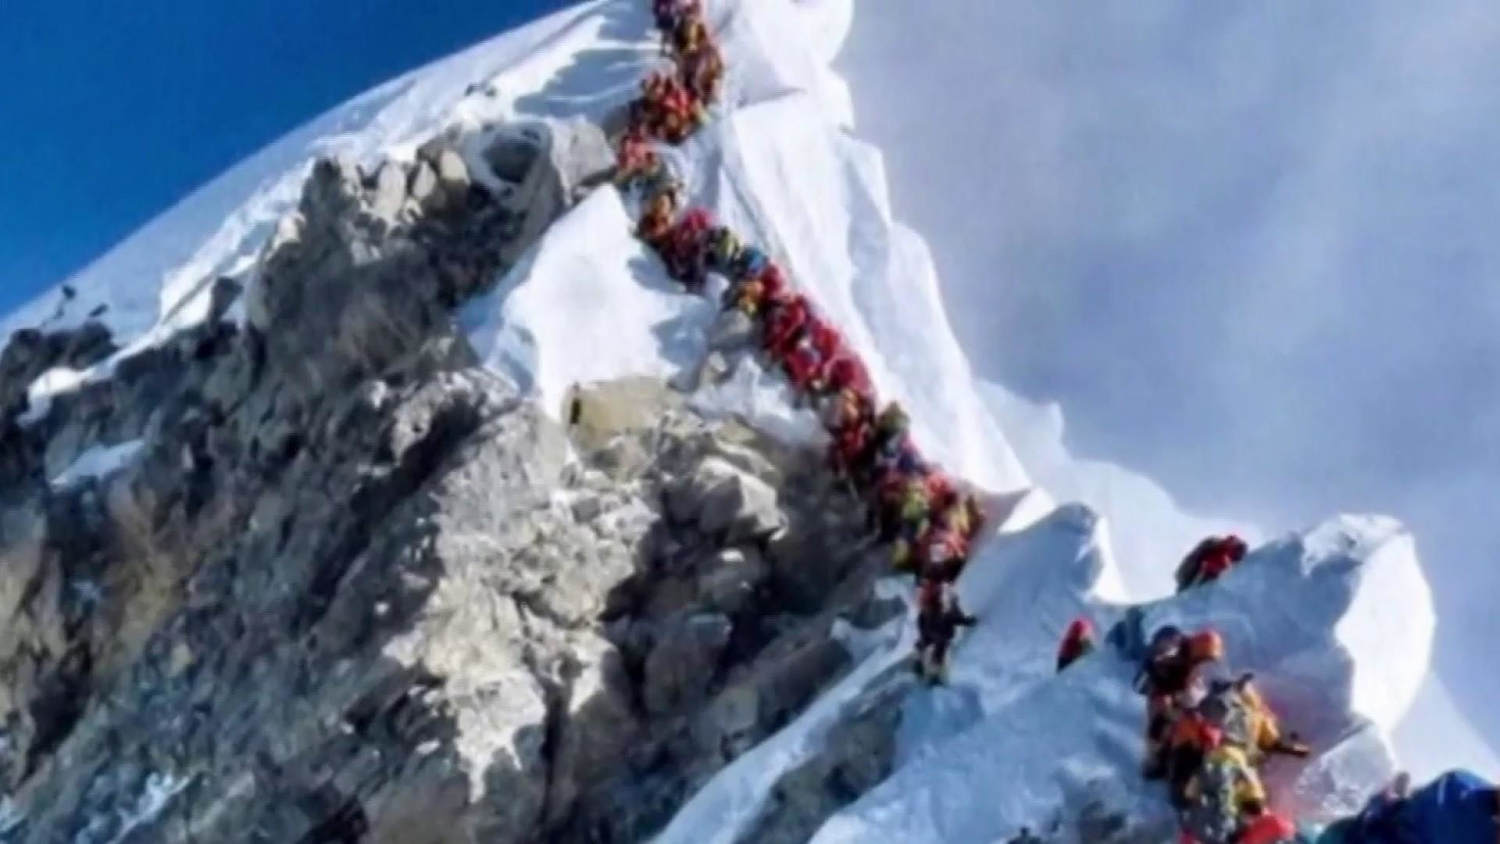 Three more climbers die on Mount Everest as busy season causes traffic jam